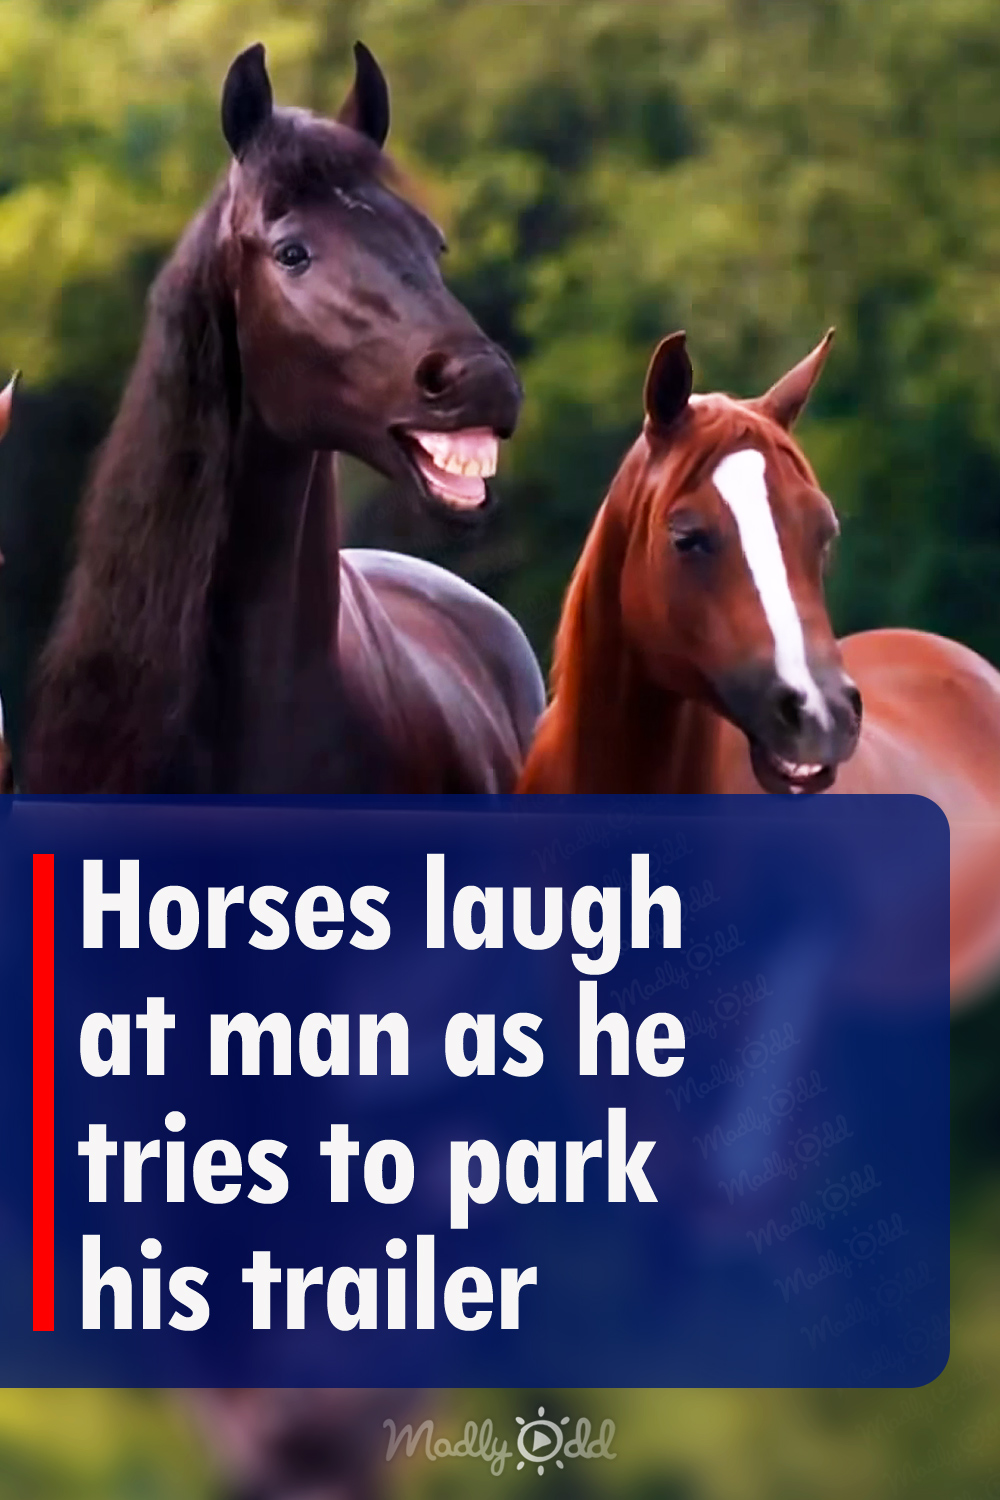 Horses laugh at man as he tries to park his trailer